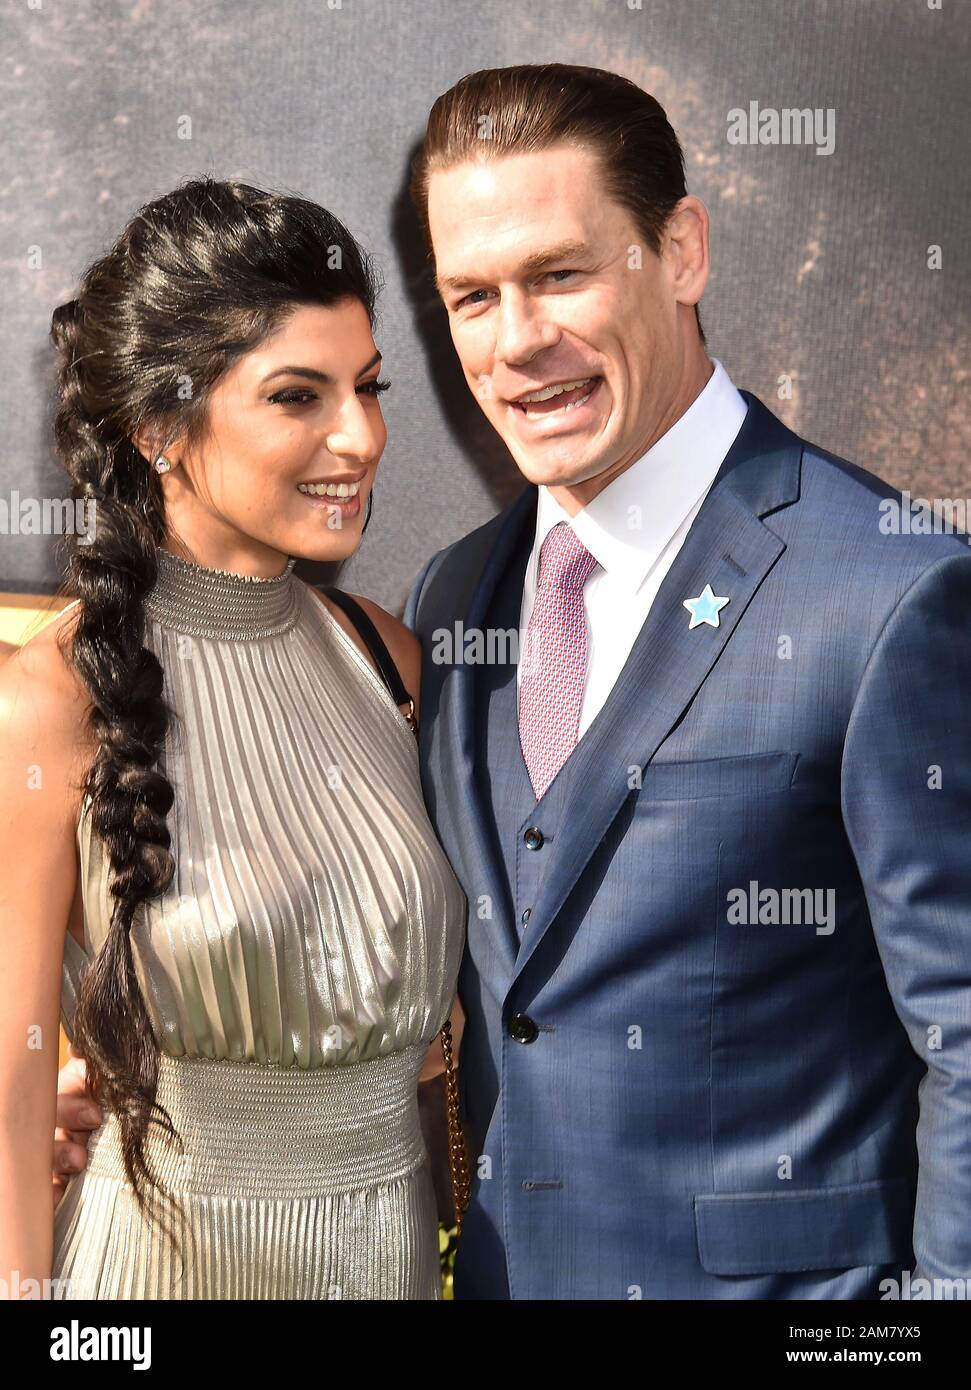 WESTWOOD, CA - JANUARY 11: Shay Shariatzadeh (L) and John Cena attend the Premiere of Universal Pictures' 'Dolittle' at Regency Village Theatre on January 11, 2020 in Westwood, California. Stock Photo